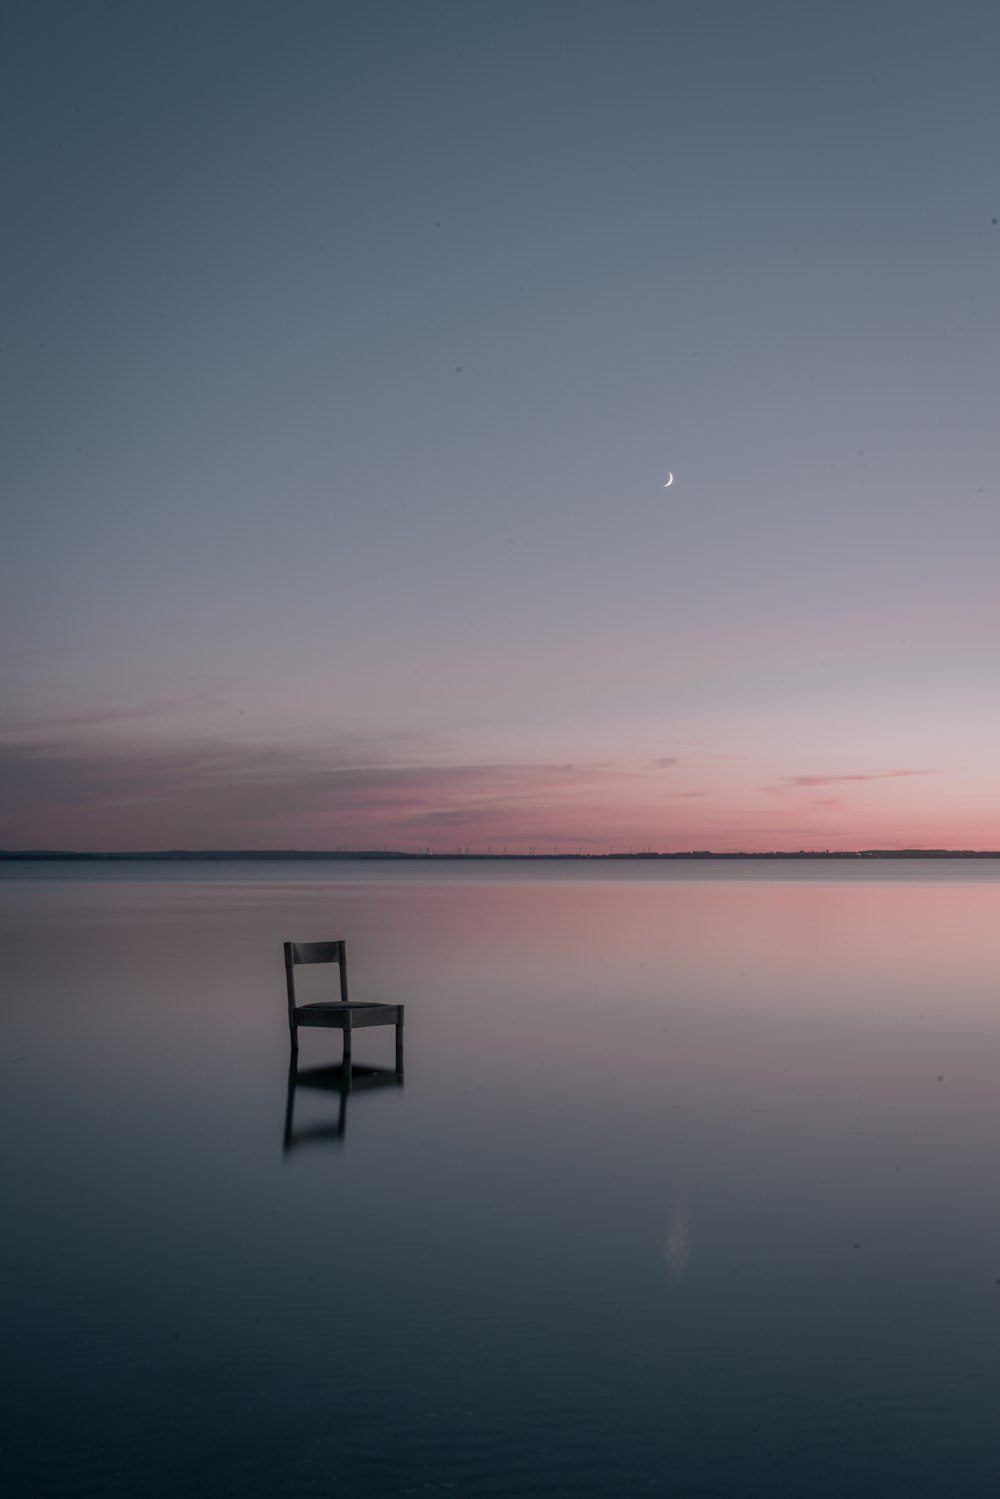 brown wooden dock on calm water during sunset